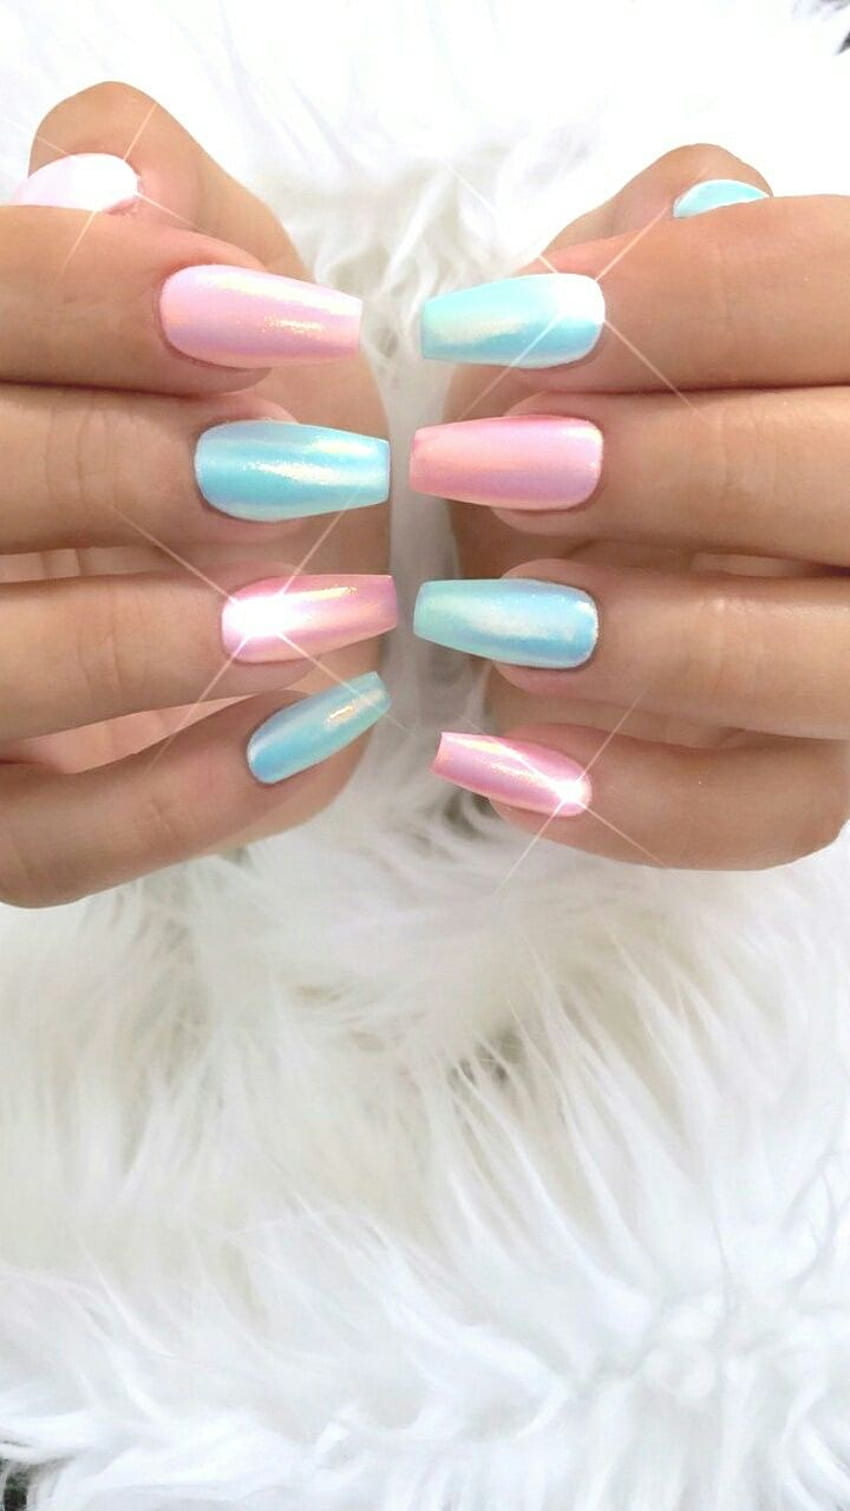 A woman with pink and blue nails on her hands - Nails